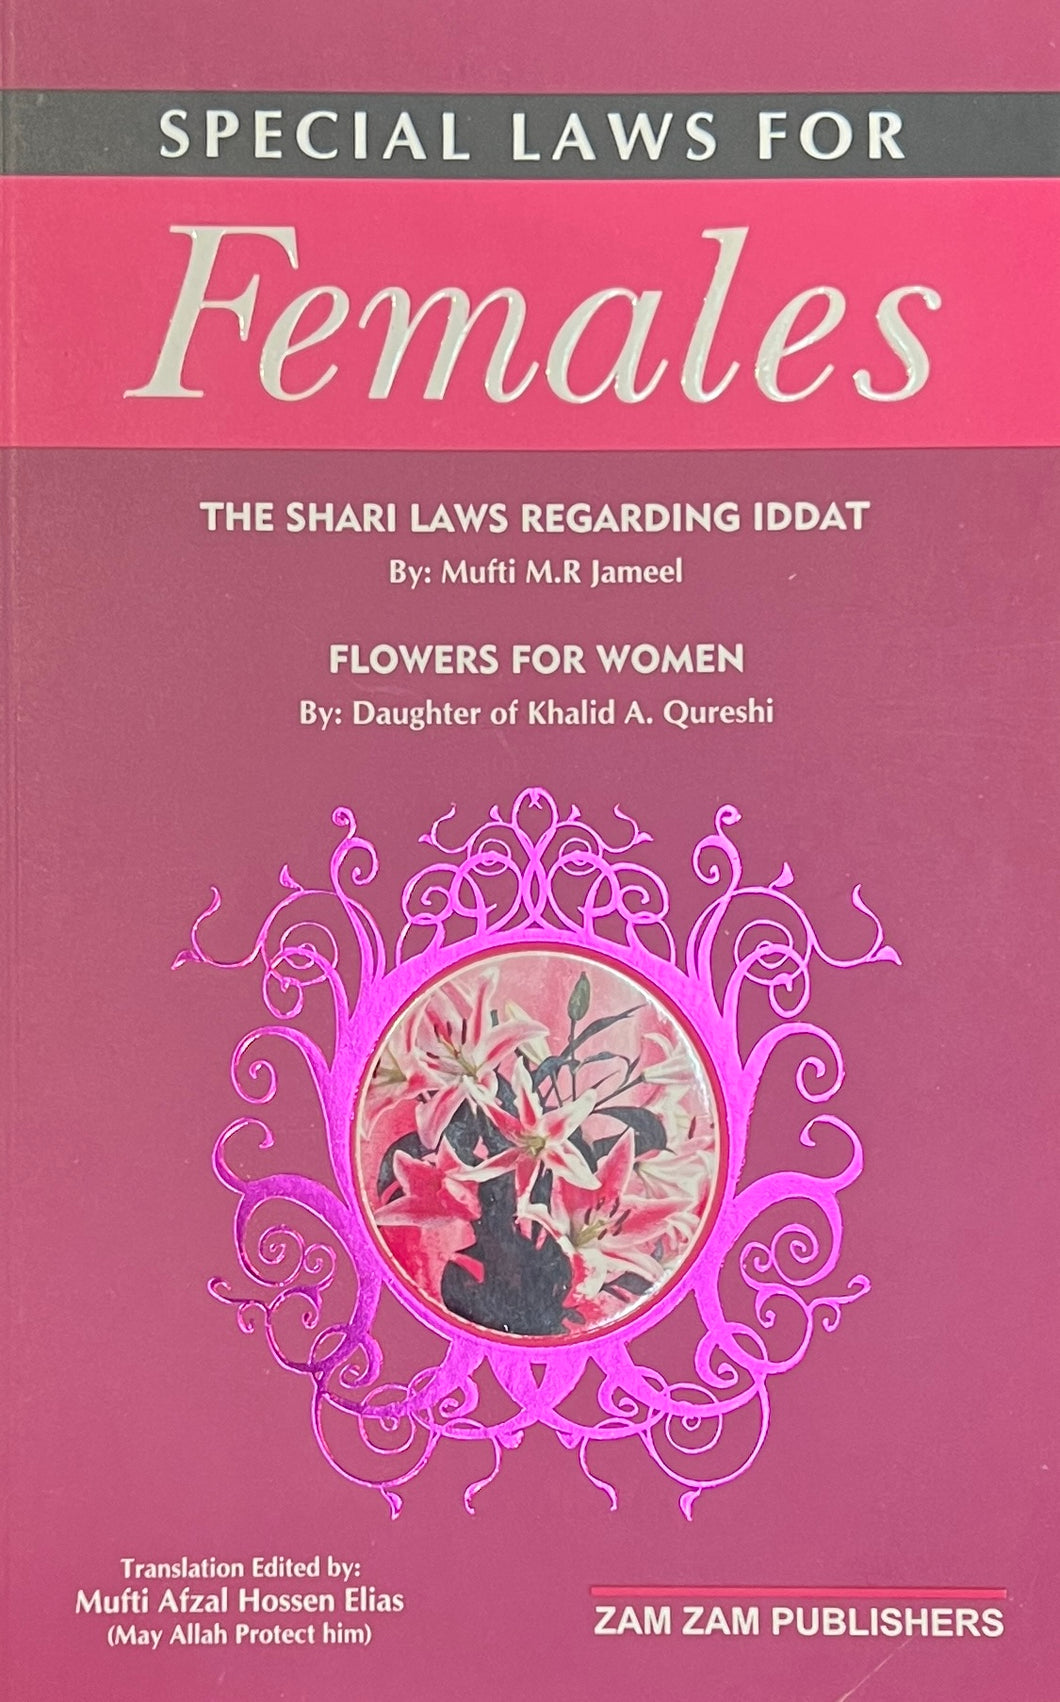 Special Laws for Females & Flowers For Women,Shari Laws on Iddat